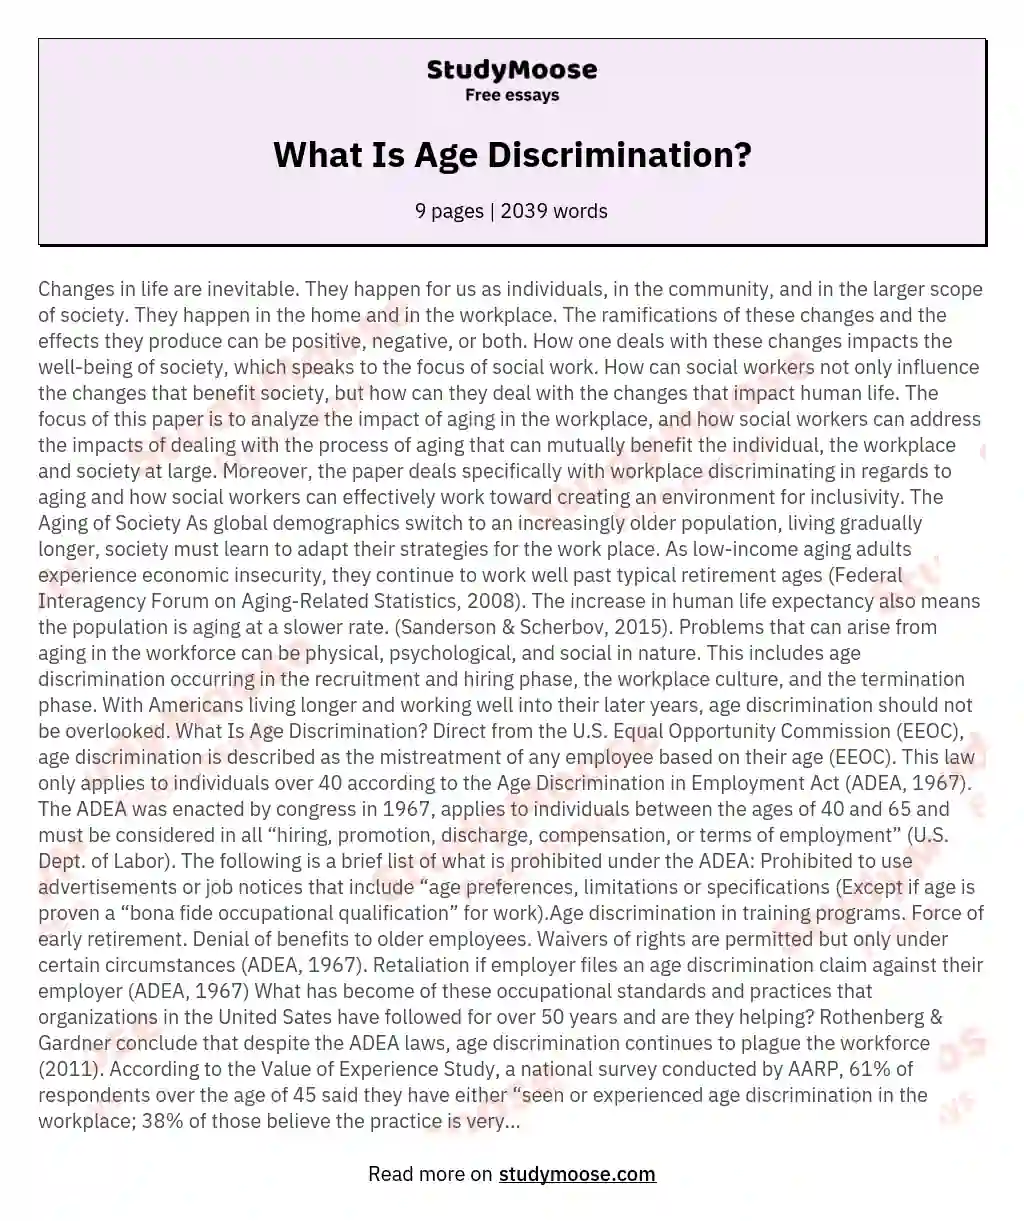 What Is Age Discrimination? essay